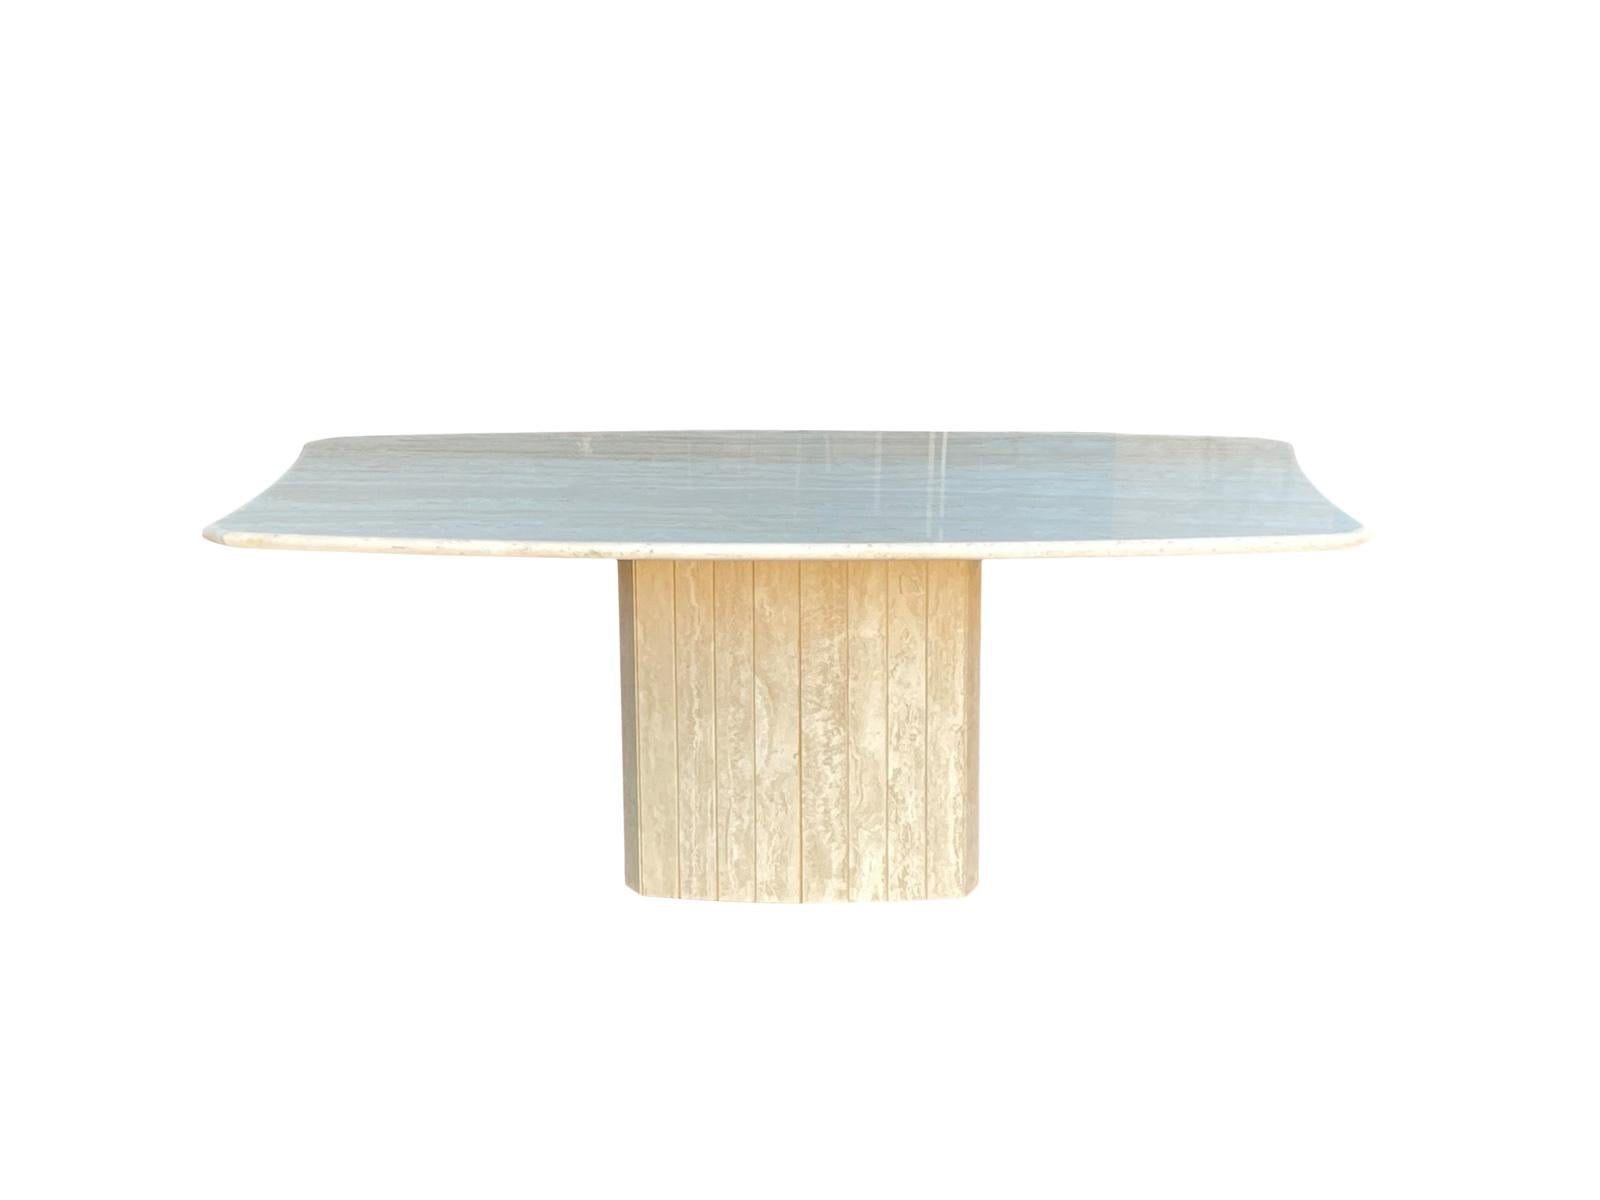 Italian Unique Travertine Stone Dining Table With Pedestal Base For Sale